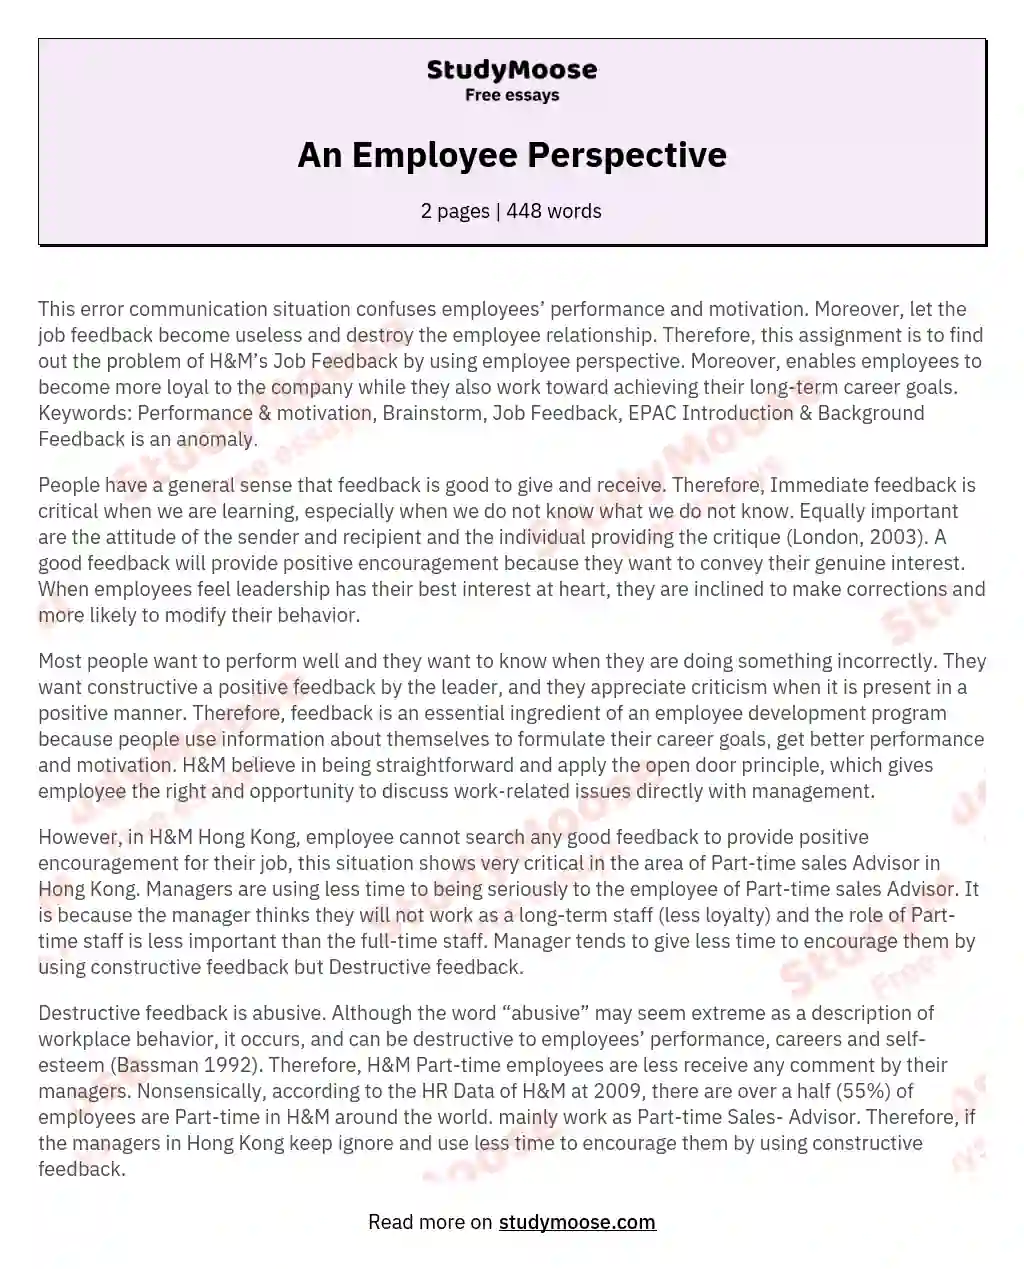 An Employee Perspective essay